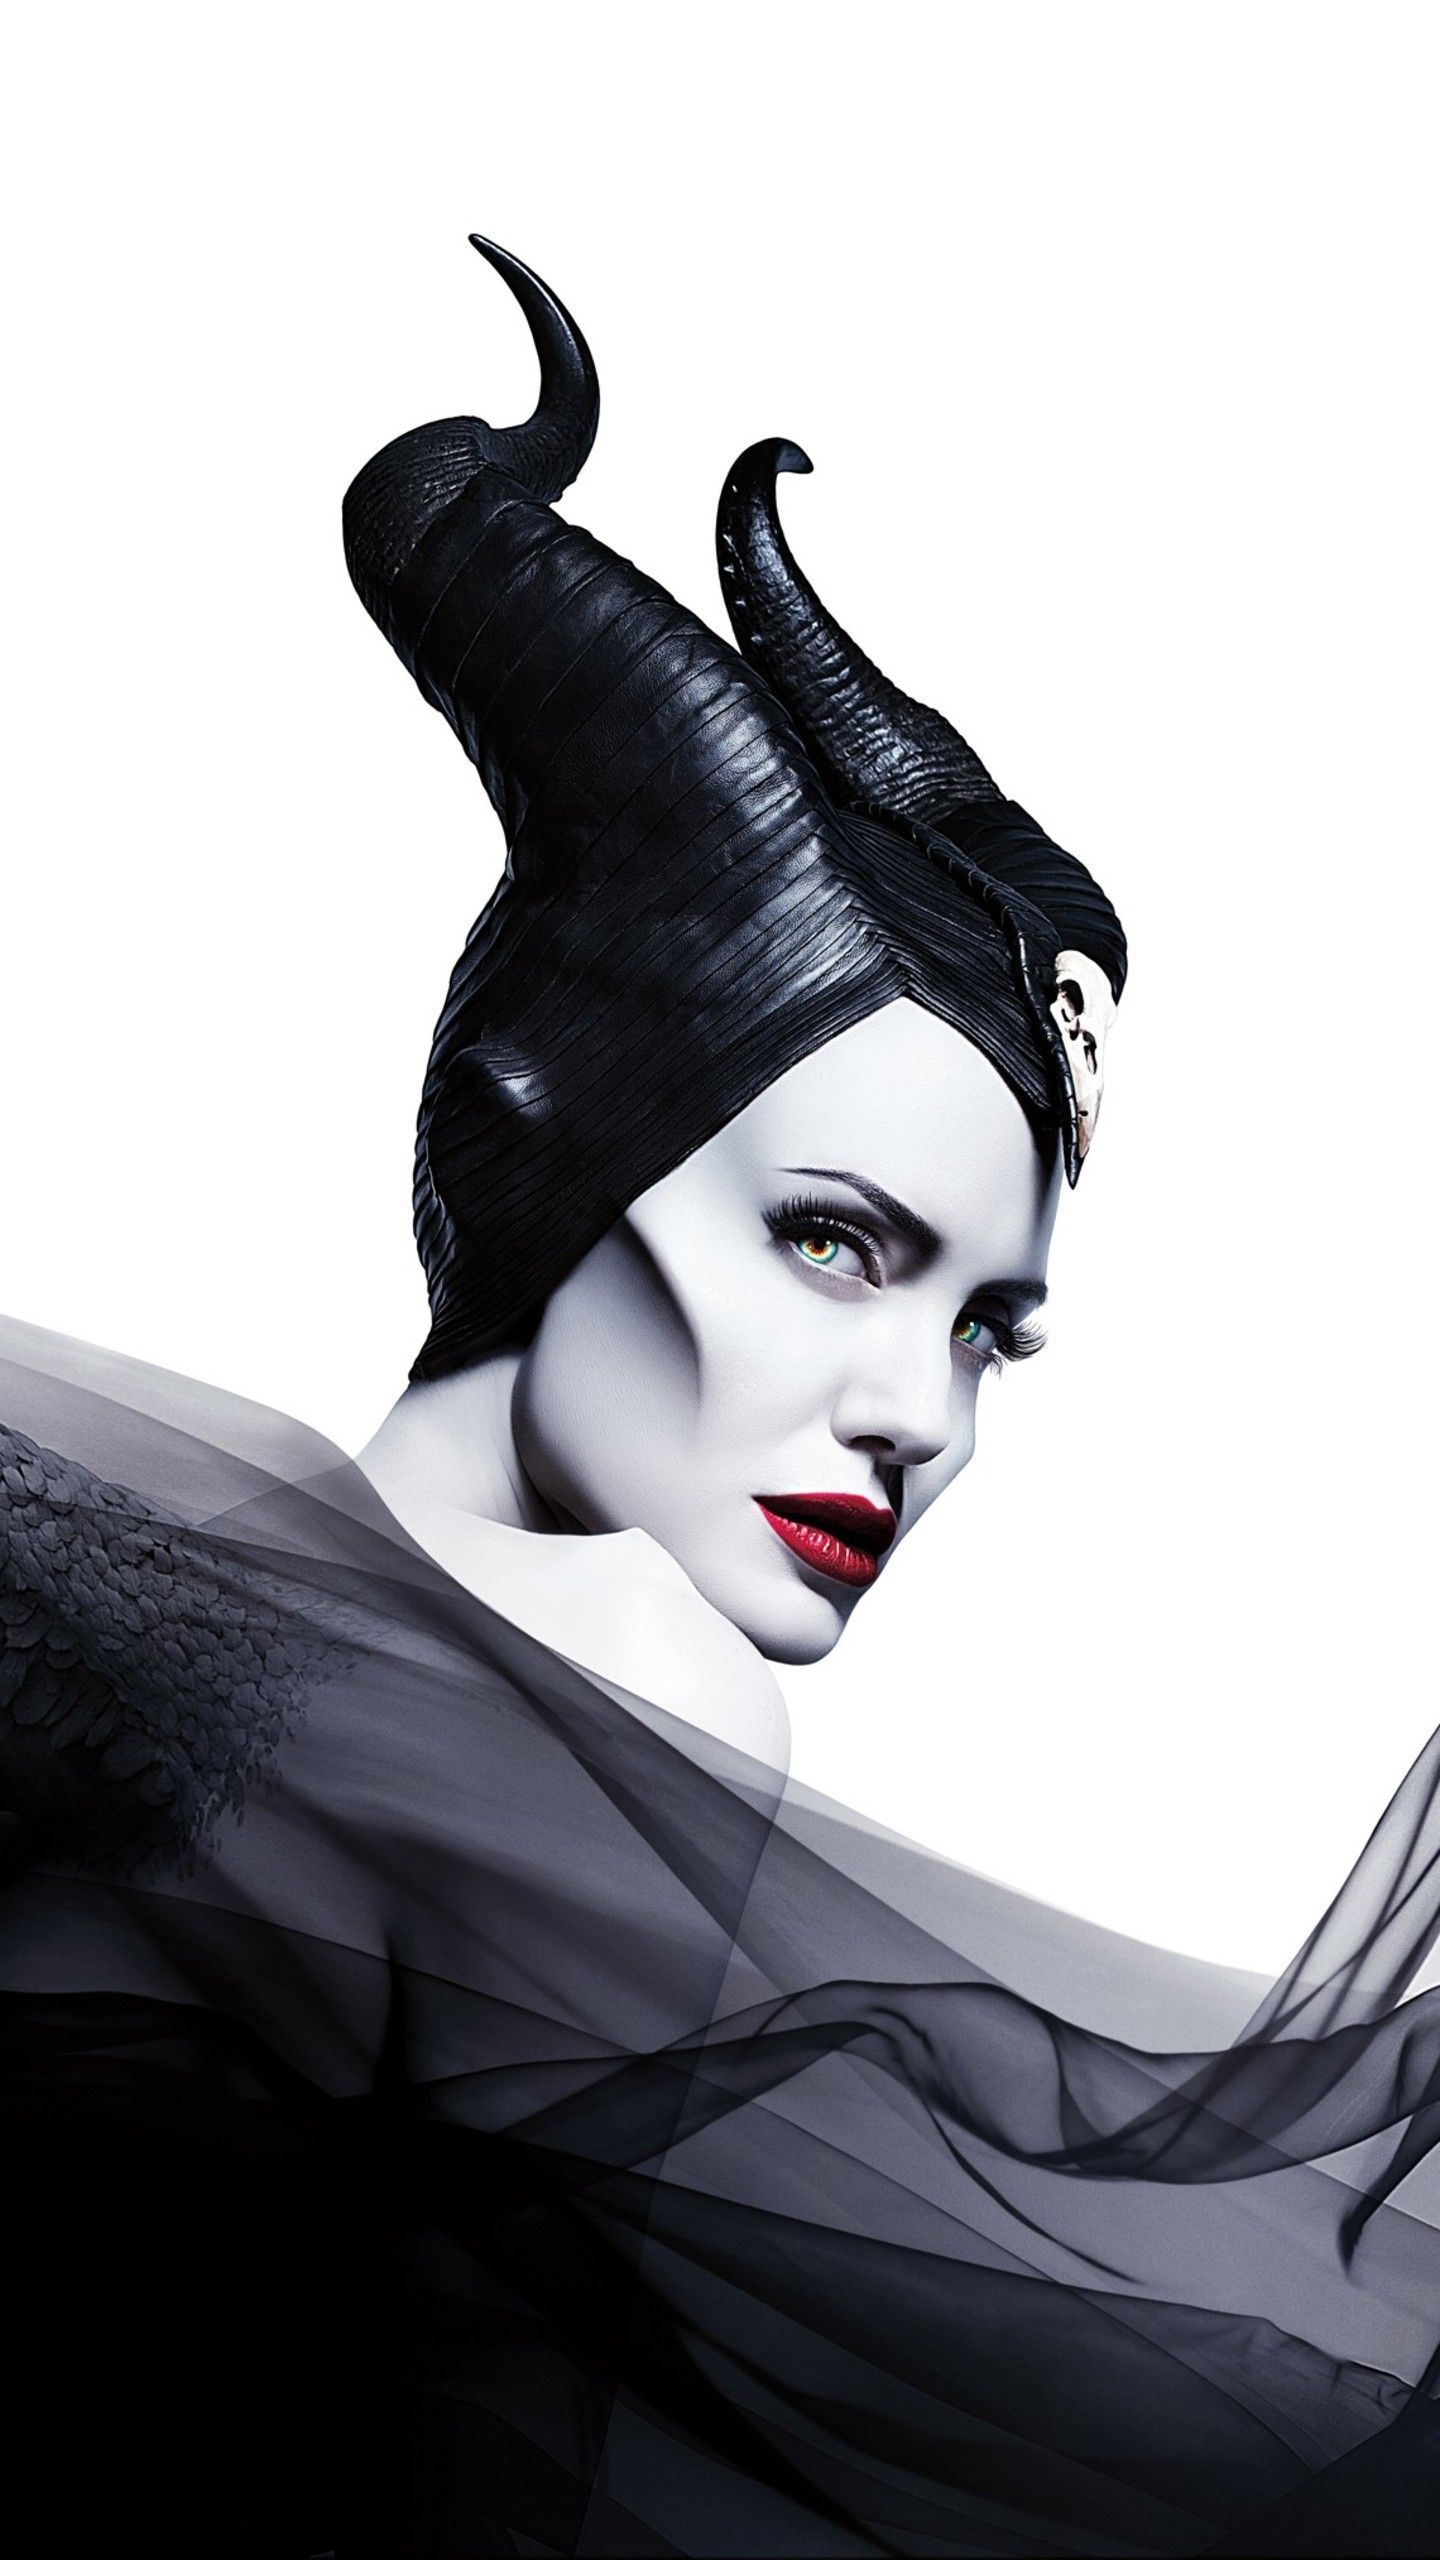 4K Poster Of Maleficent 2 Wallpapers